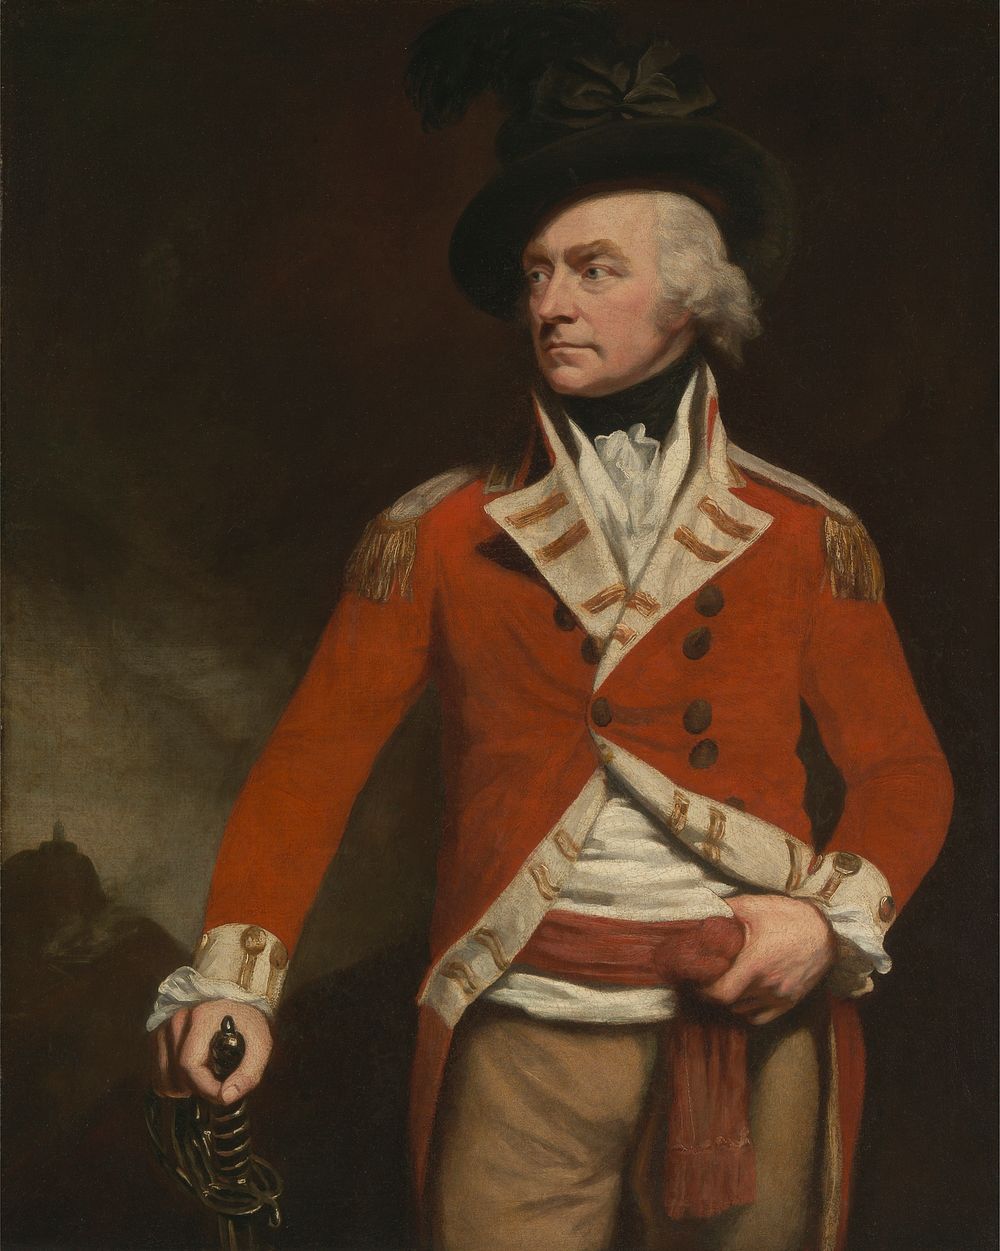 Colonel Donald MacLeod of St. Kilda by John Opie